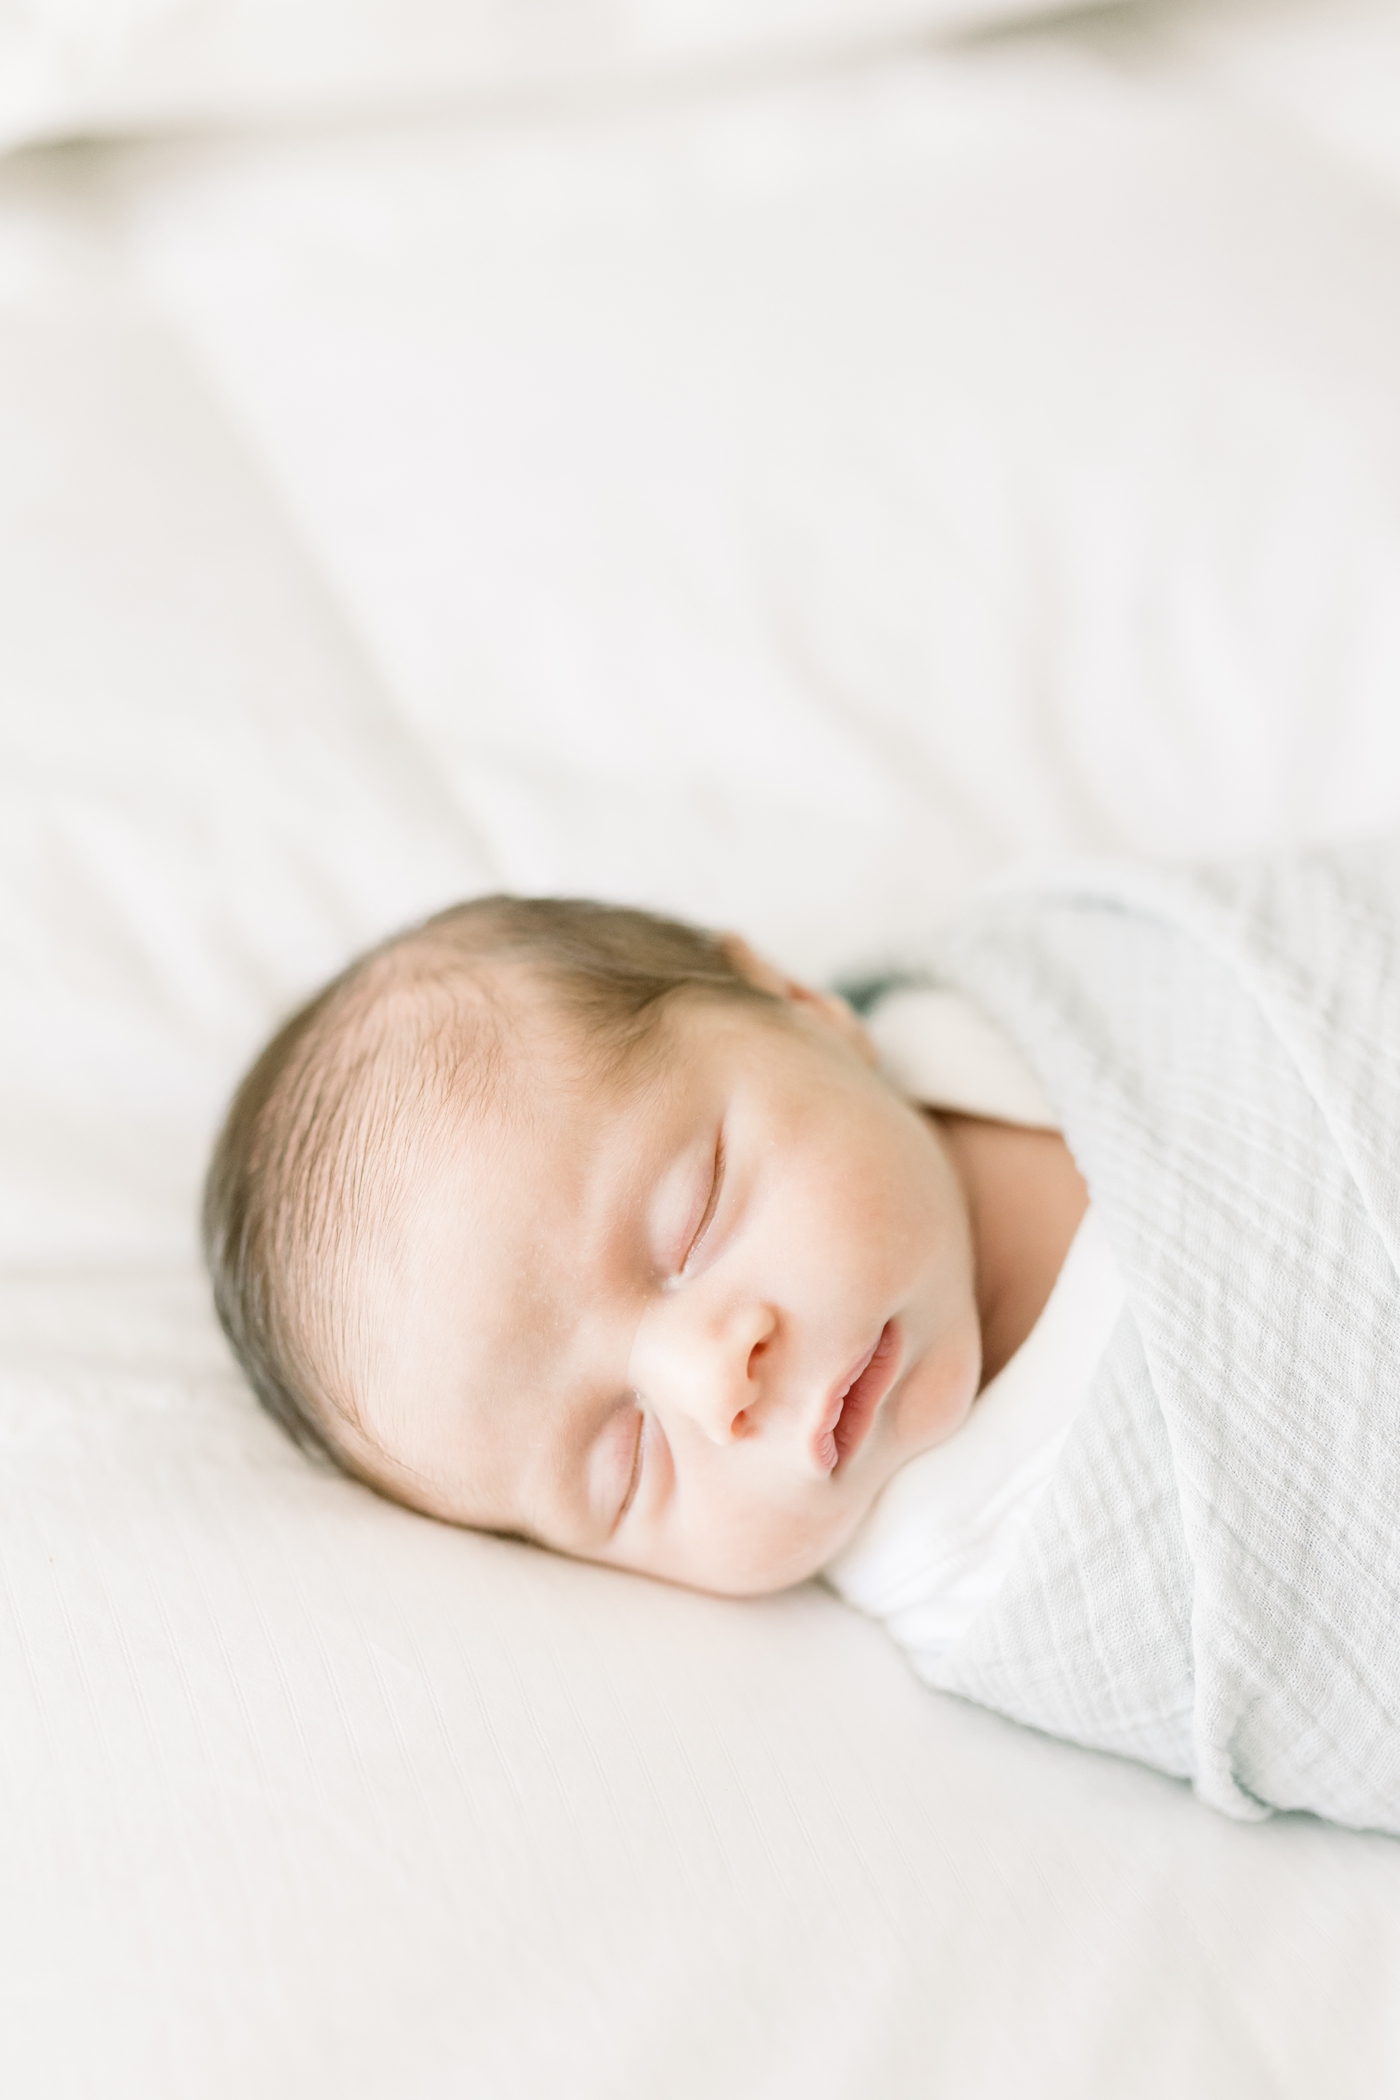 Sleeping newborn baby wrapped in a cream swaddle | Photo by Caitlyn Motycka Photography.